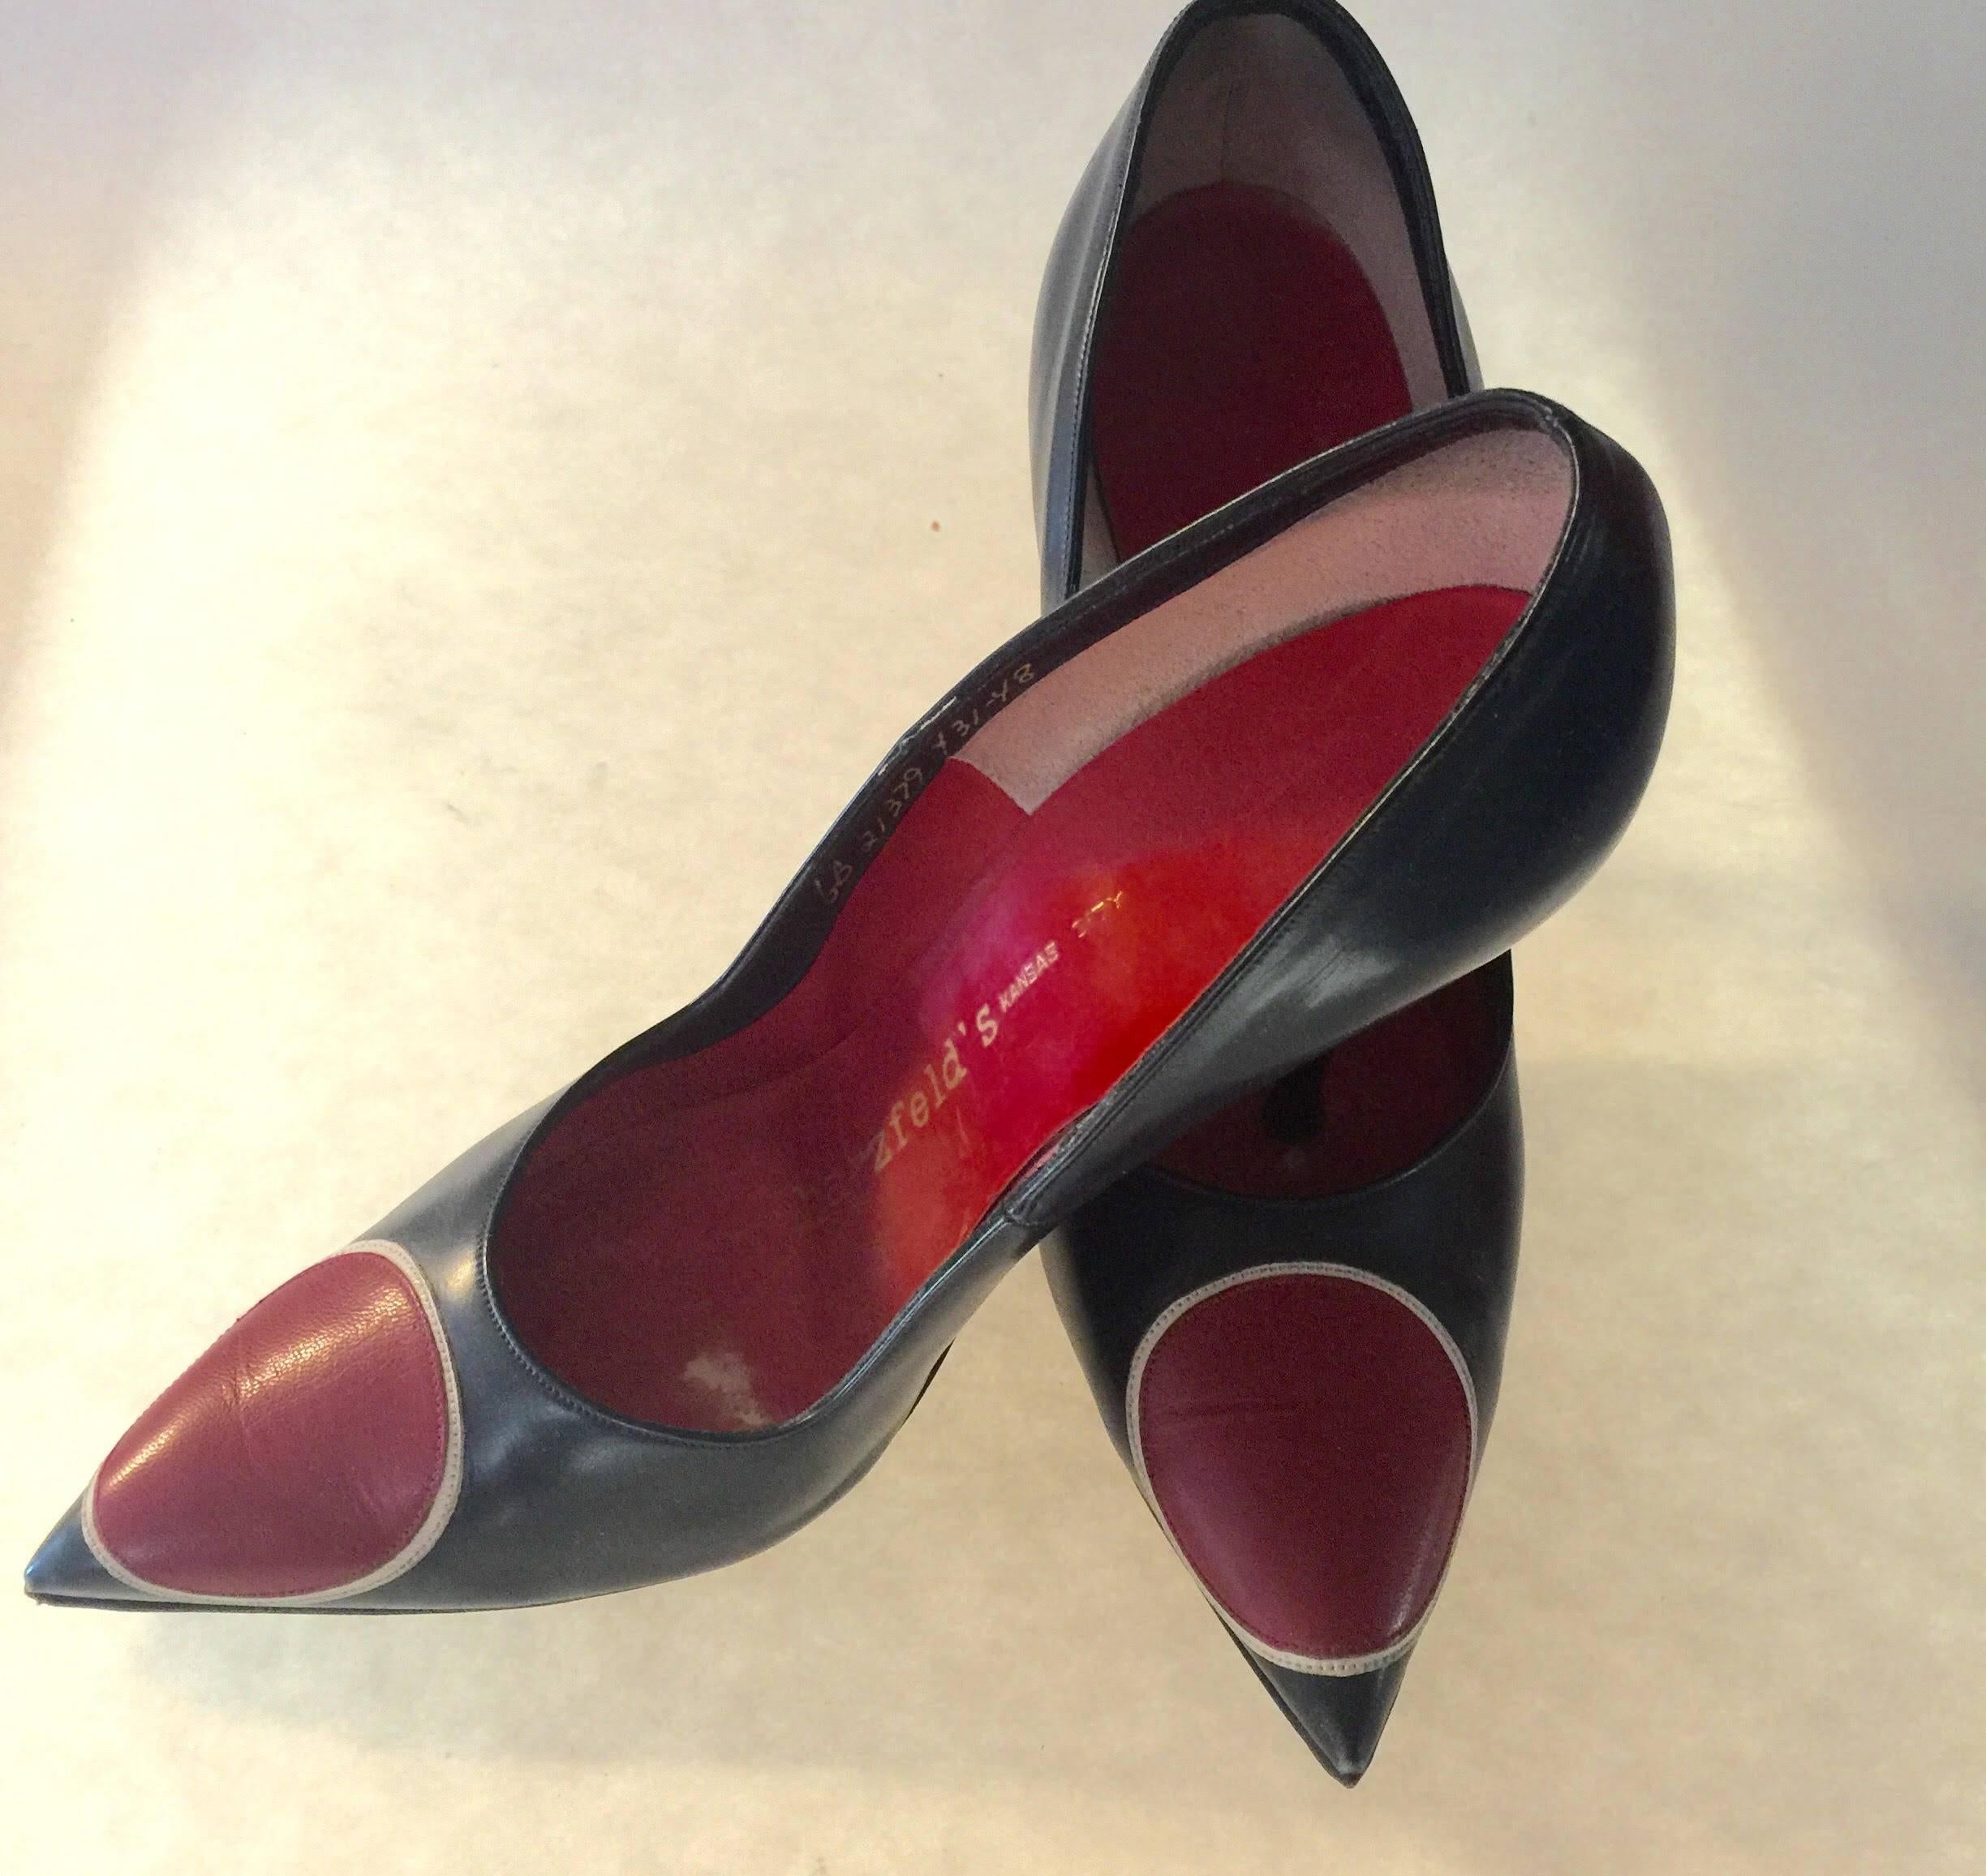 Fabulous Navy Blue and red Leather 1960's super stiletto vintage high heeled shoes. SIZE 6B. Amazing design, Herbert levine shoes are considered to be among the finest designed shoes of any desginer and maker in any decade. Shoe designer